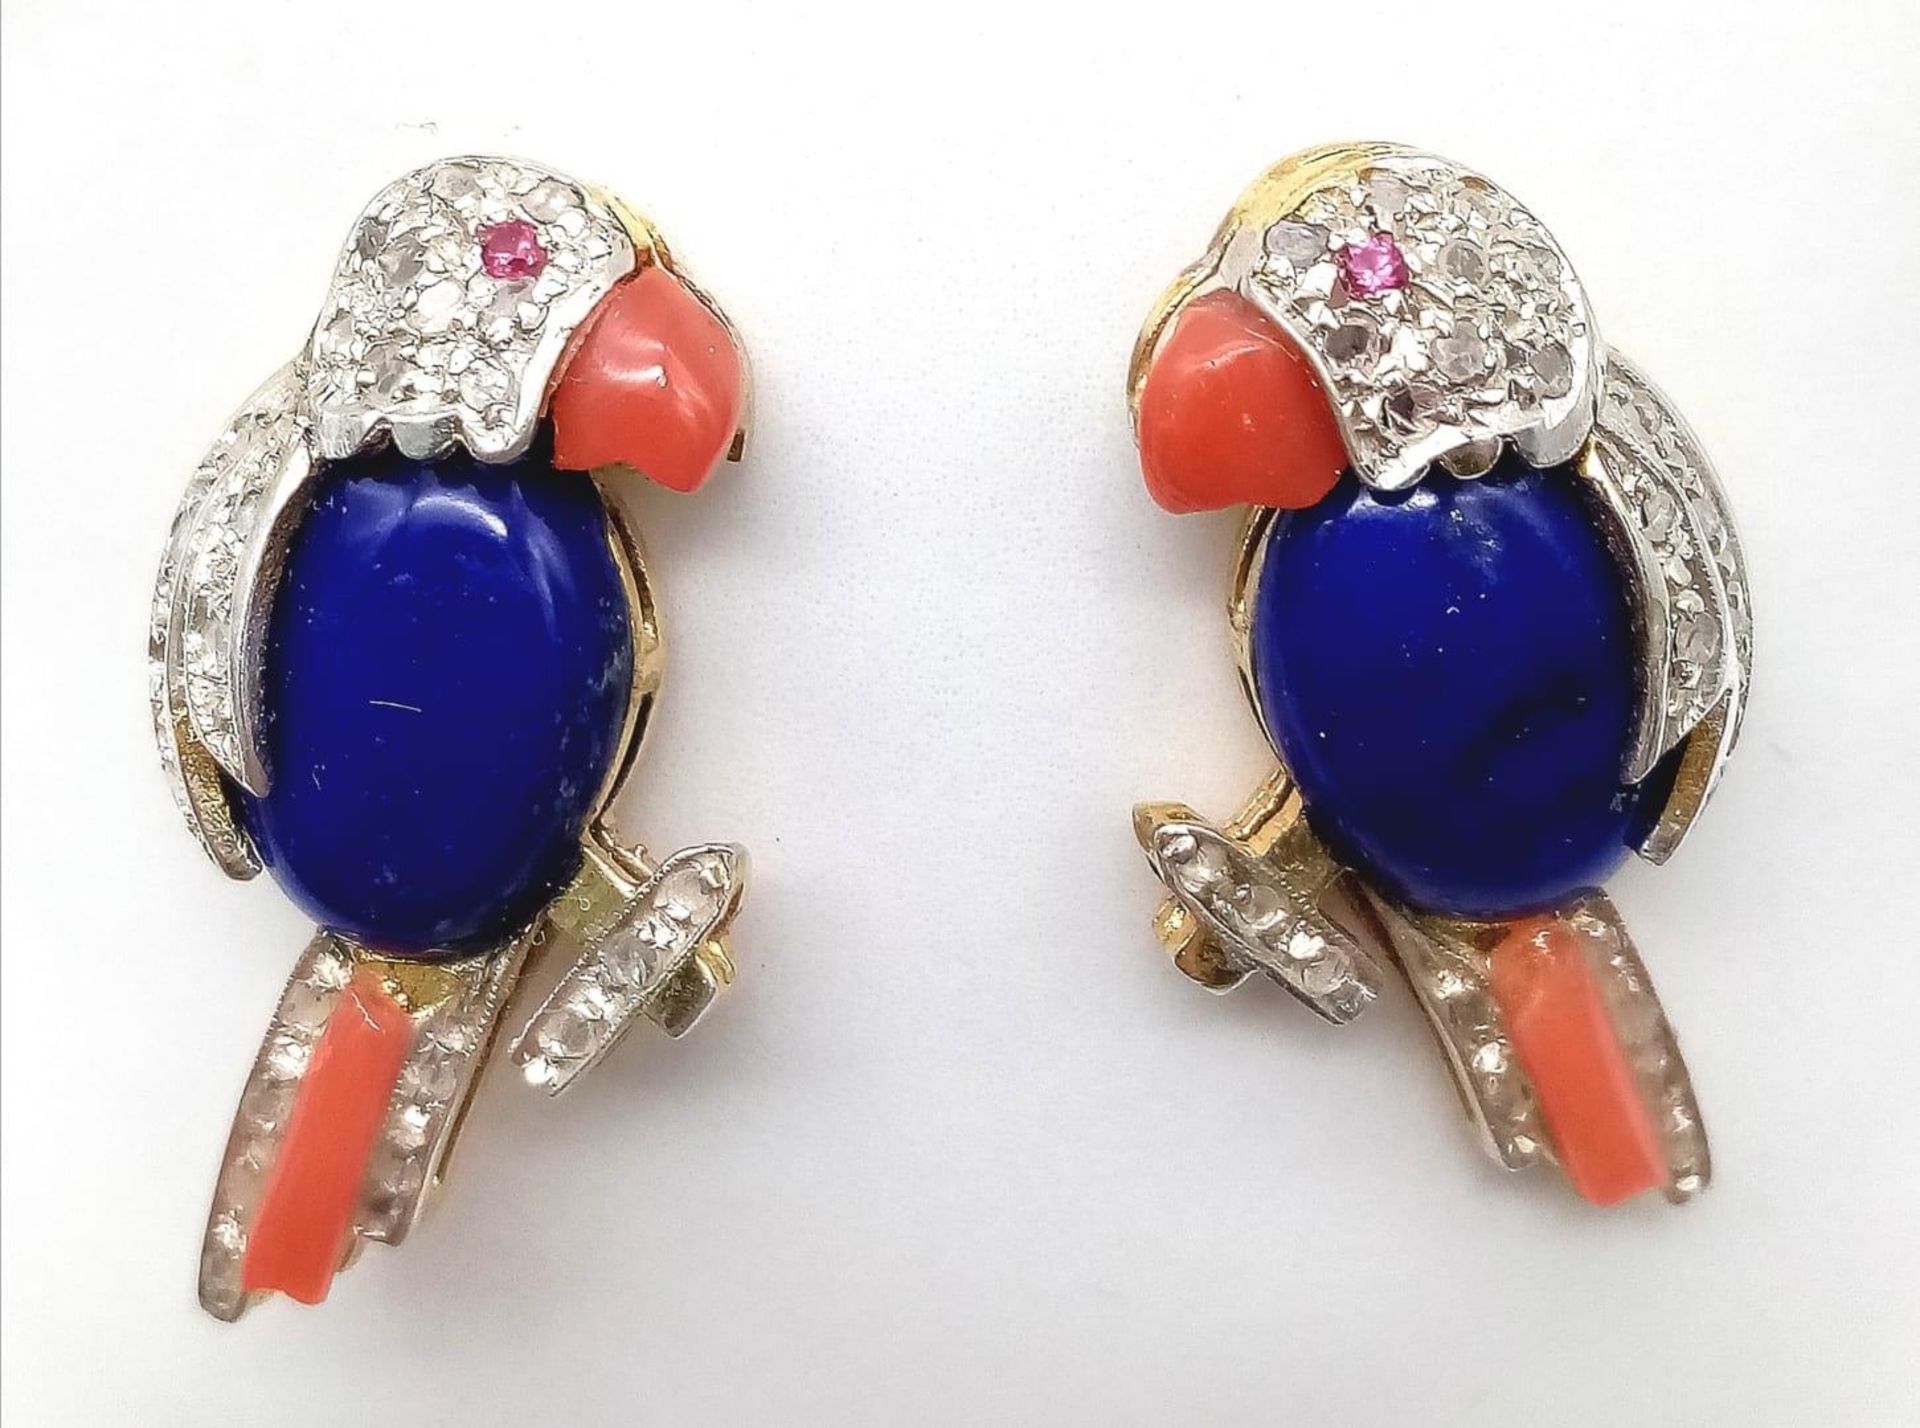 A Glorious Pair of 18K Gold, Lapis, Ruby, Coral and Diamond Parrot Earrings! There is so much